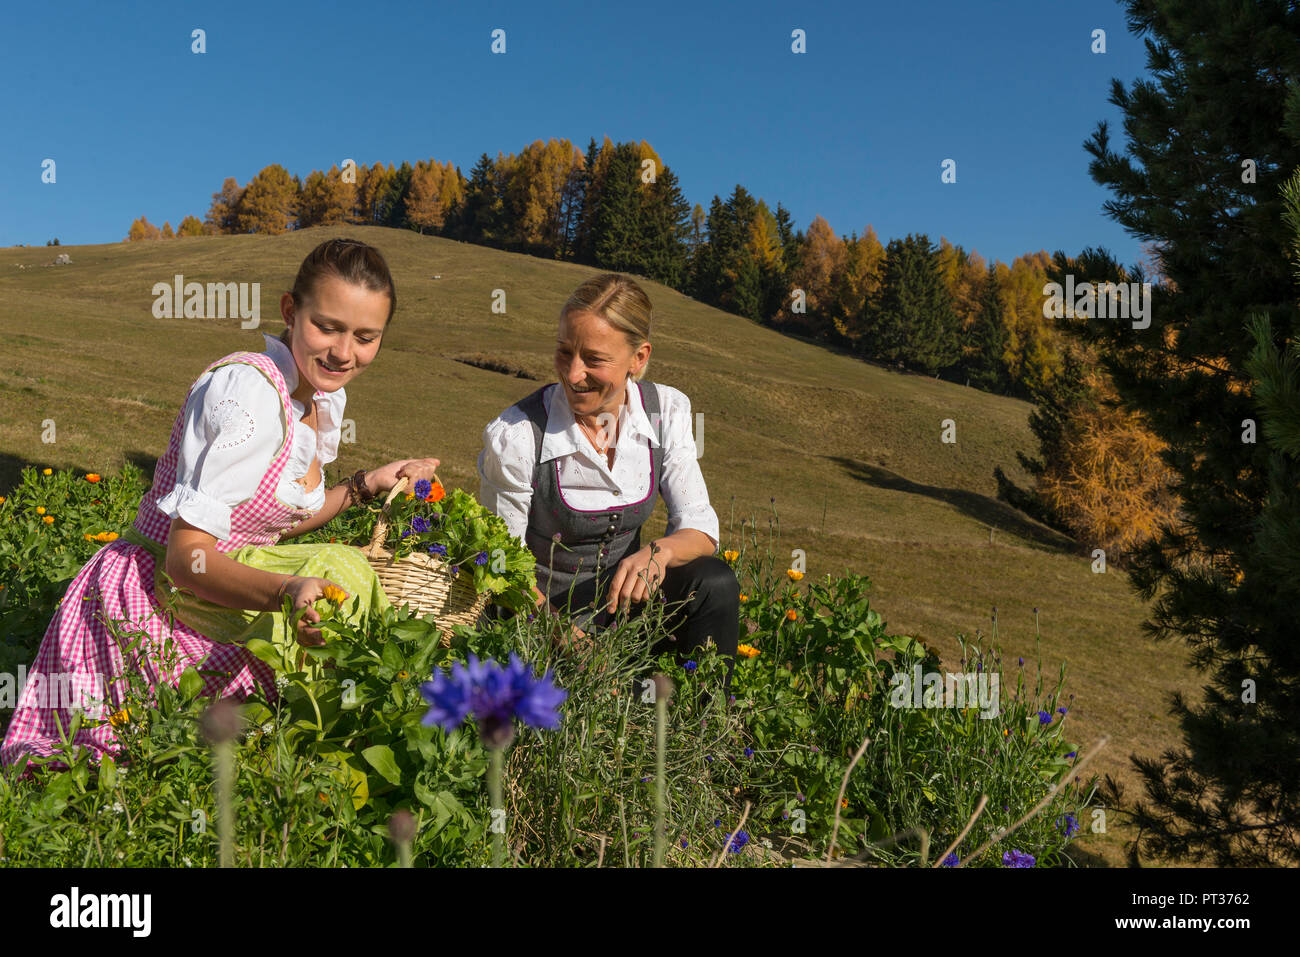 Helga and Maria Lageder with flower basket, Seiser Alm, near Castelrotto, Dolomites, South Tyrol, Italy Stock Photo